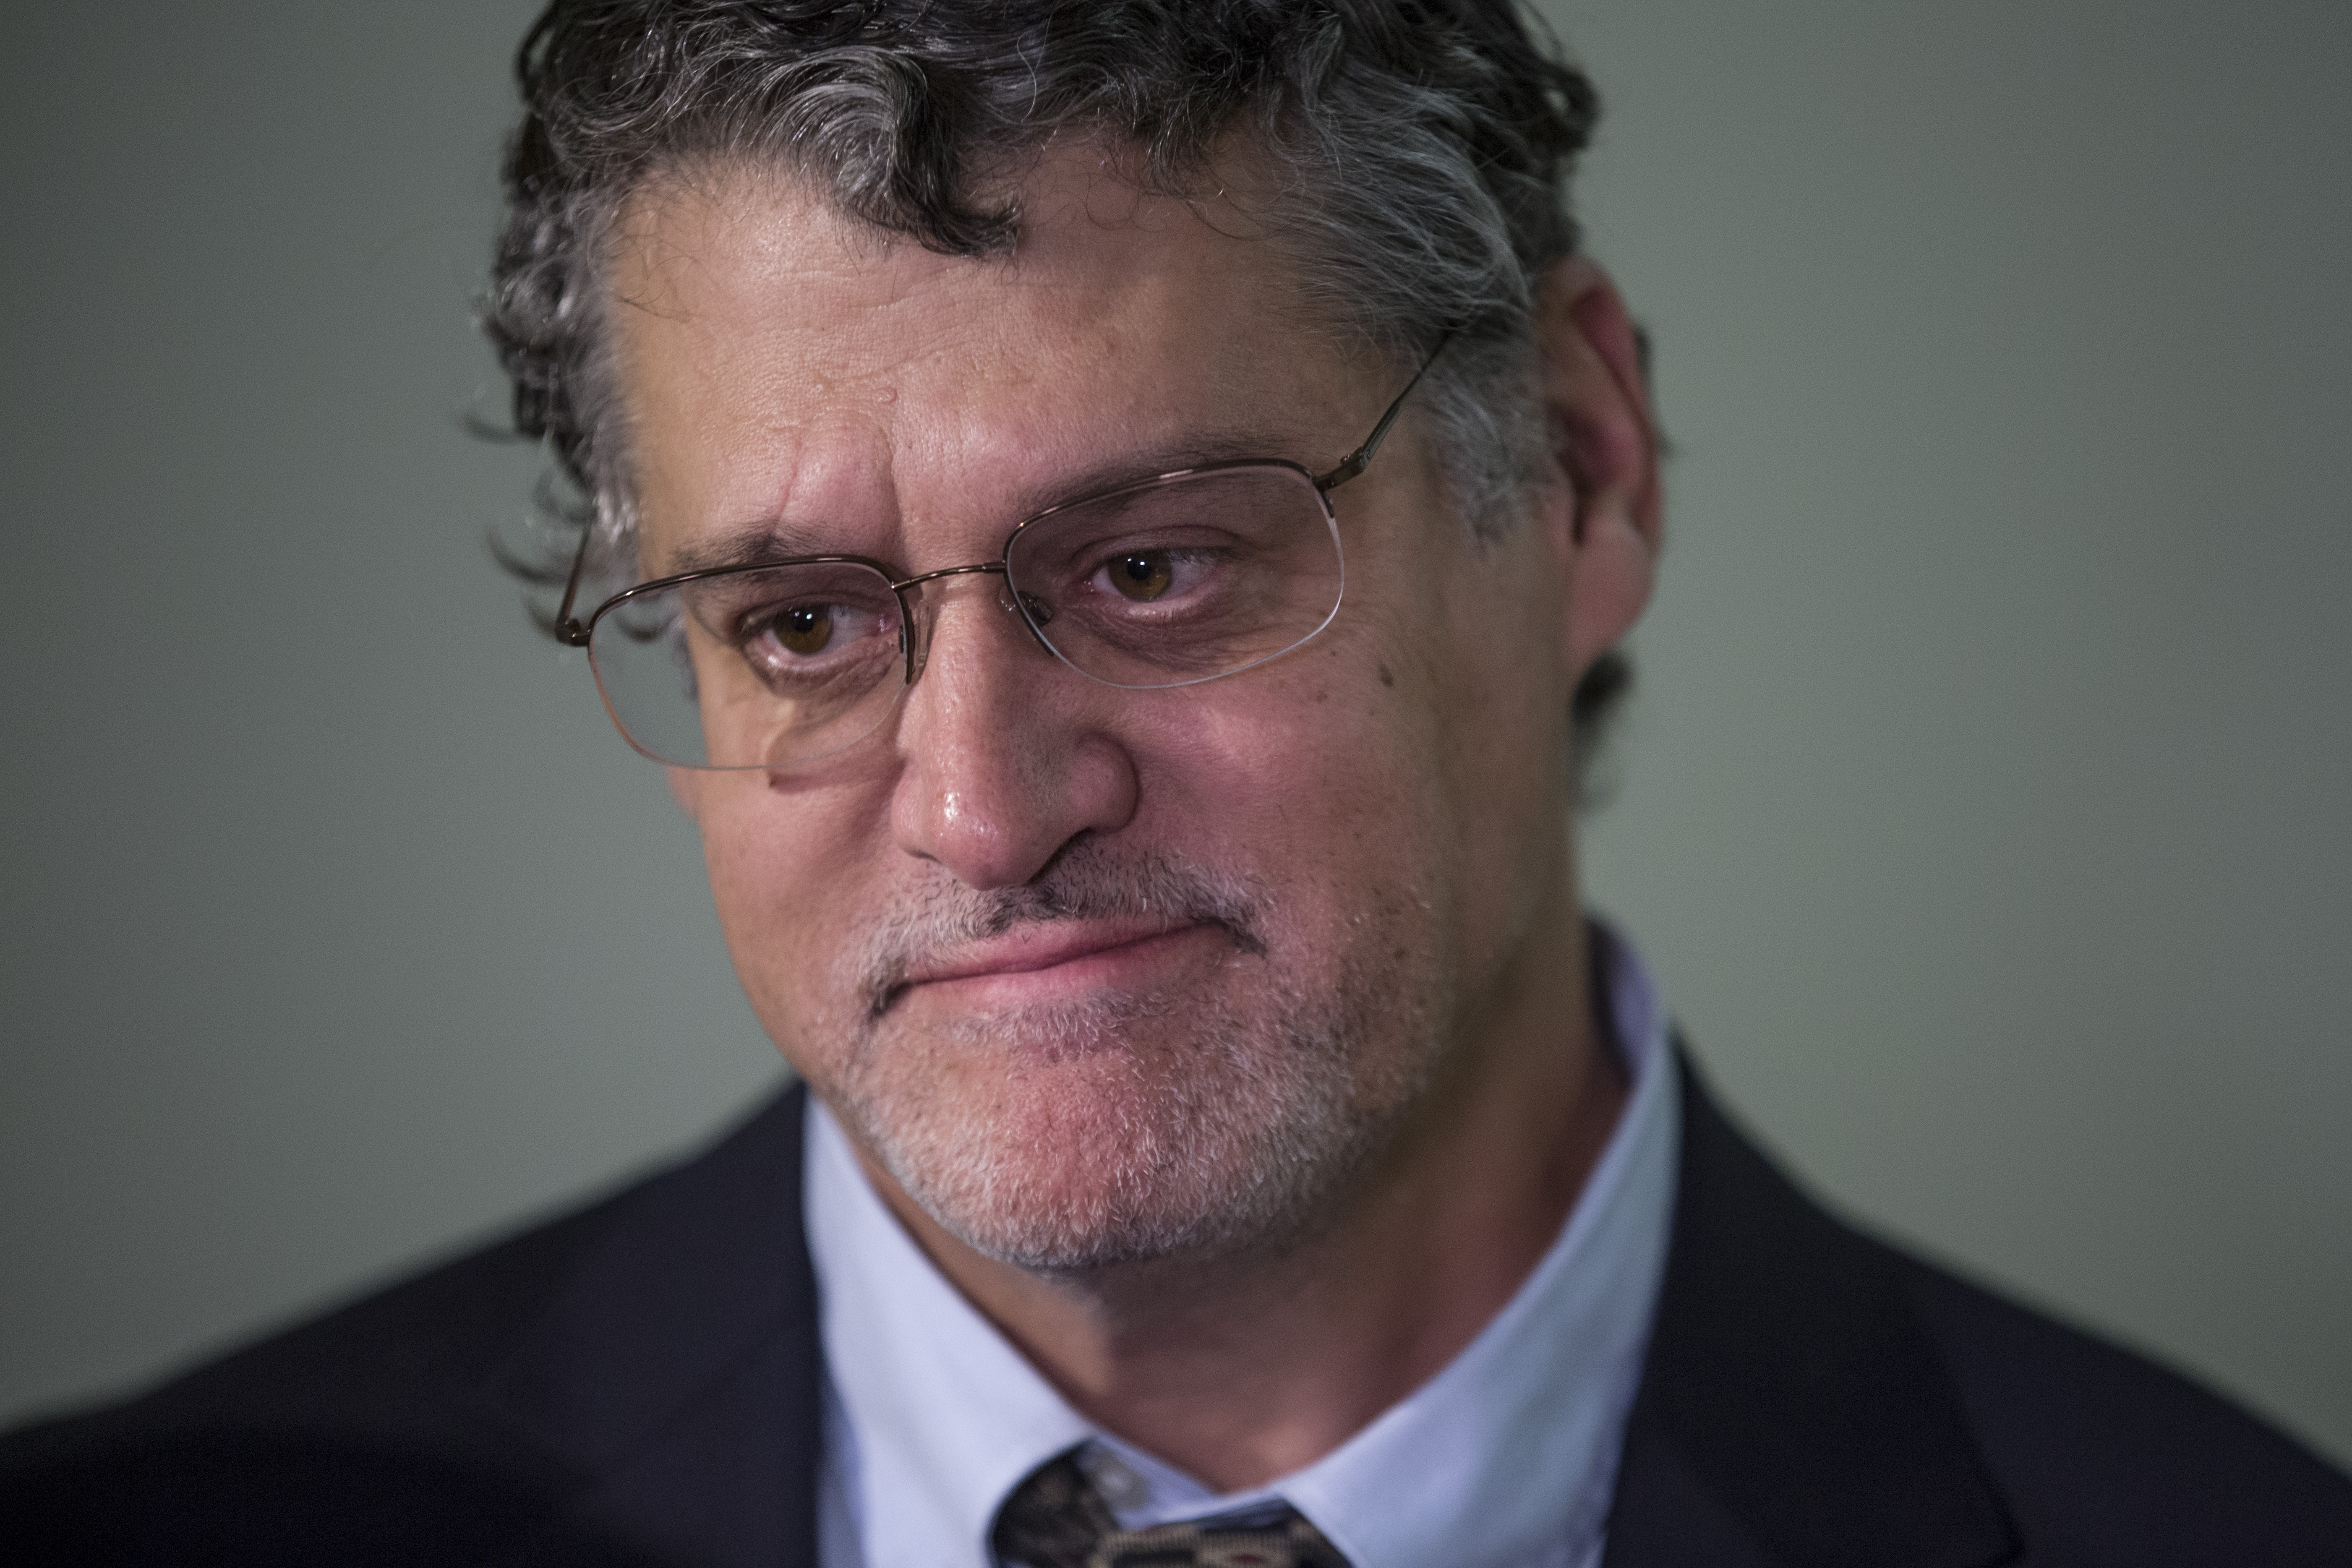 Fusion GPS Co-Founder Glenn Simpson listens as his lawyer, Joshua Levy, speaks to members of the media following a meeting with members of the House Judiciary and Oversight Committee in the Rayburn Office Building on Capitol Hill on October 16, 2018 in Washington, DC. (Photo by Zach Gibson/Getty Images)